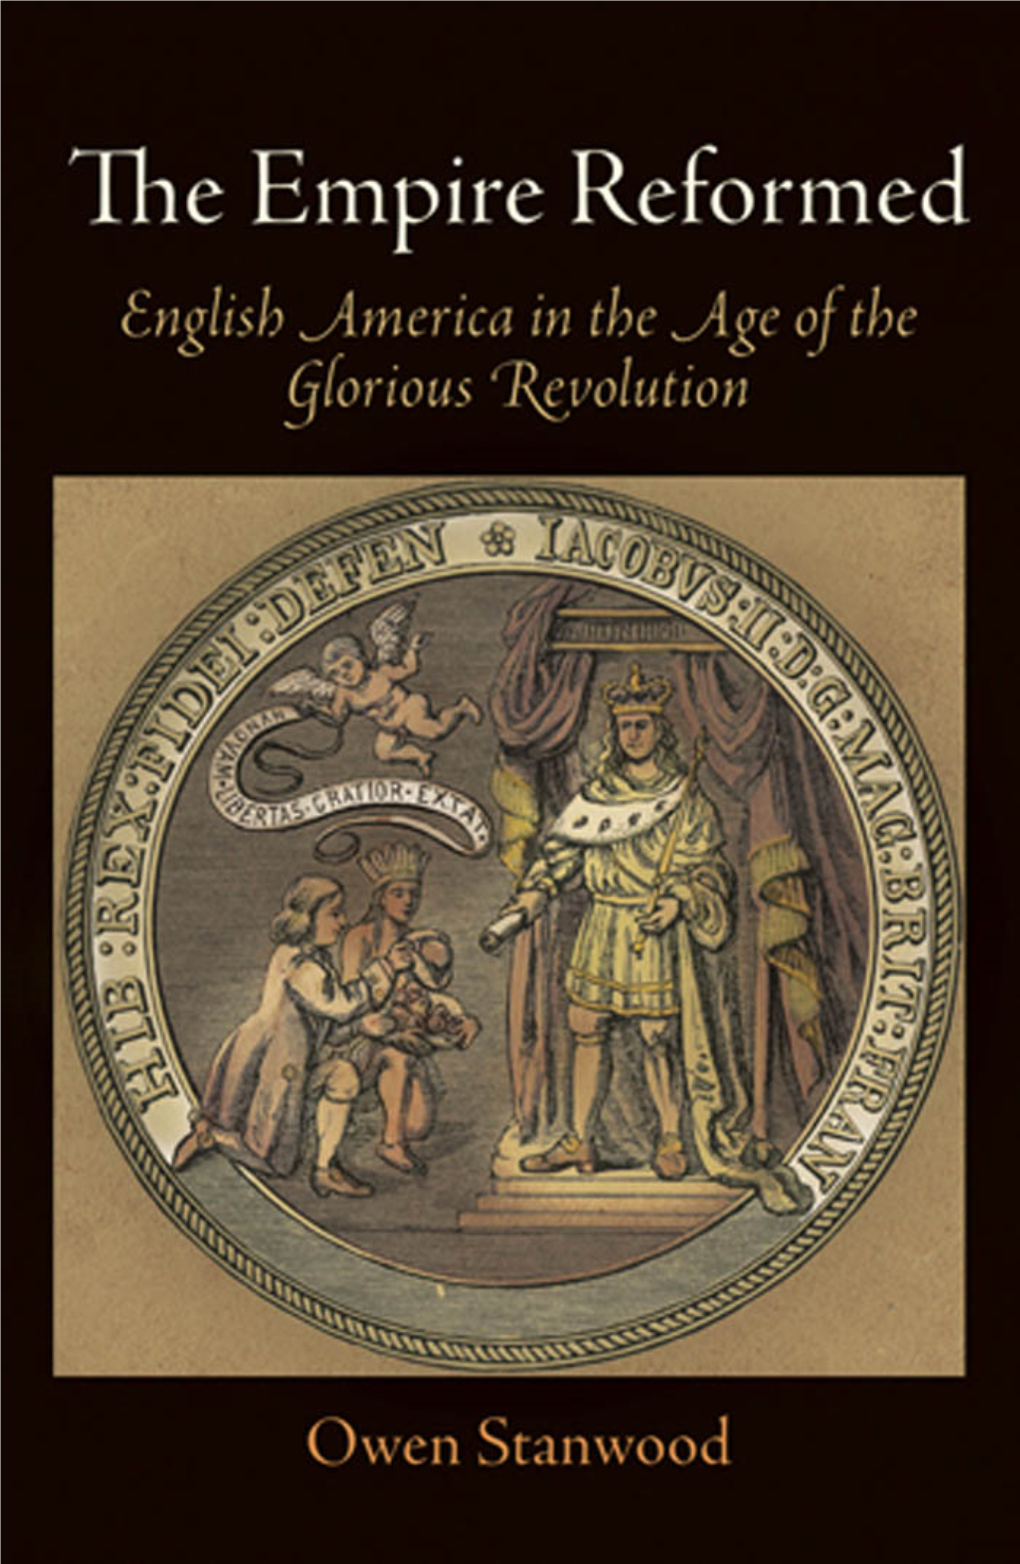 The Empire Reformed: English America in the Age of the Glorious